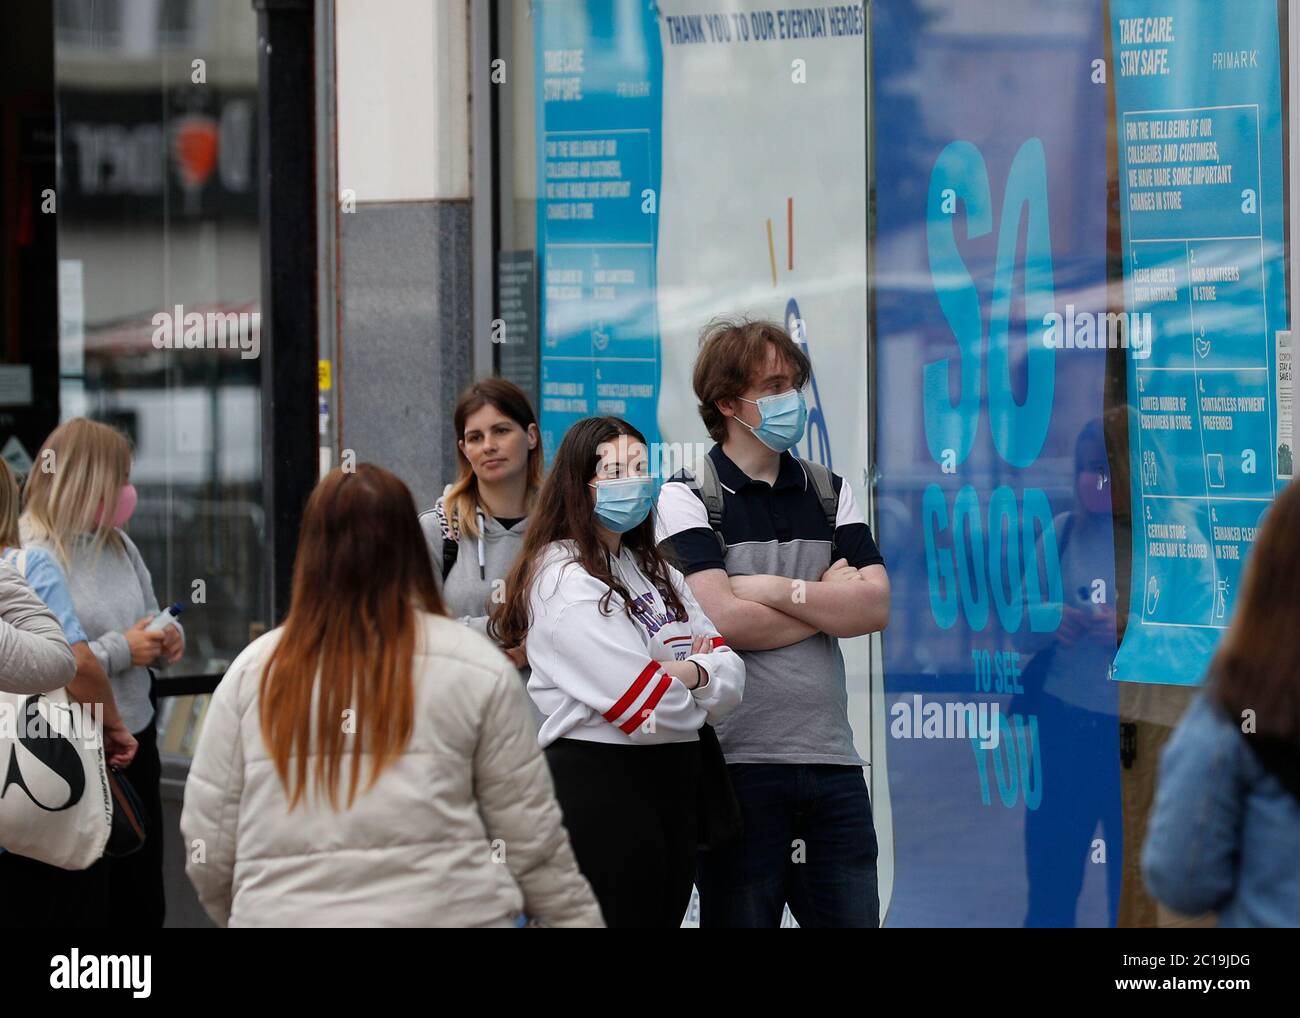 Loughborough, Leicestershire, UK. 15th June 2020. Customers queue to enter a Primark clothes store as non essential shops reopen in England after coronavirus pandemic lockdown restrictions were eased. Credit Darren Staples/Alamy Live News. Stock Photo